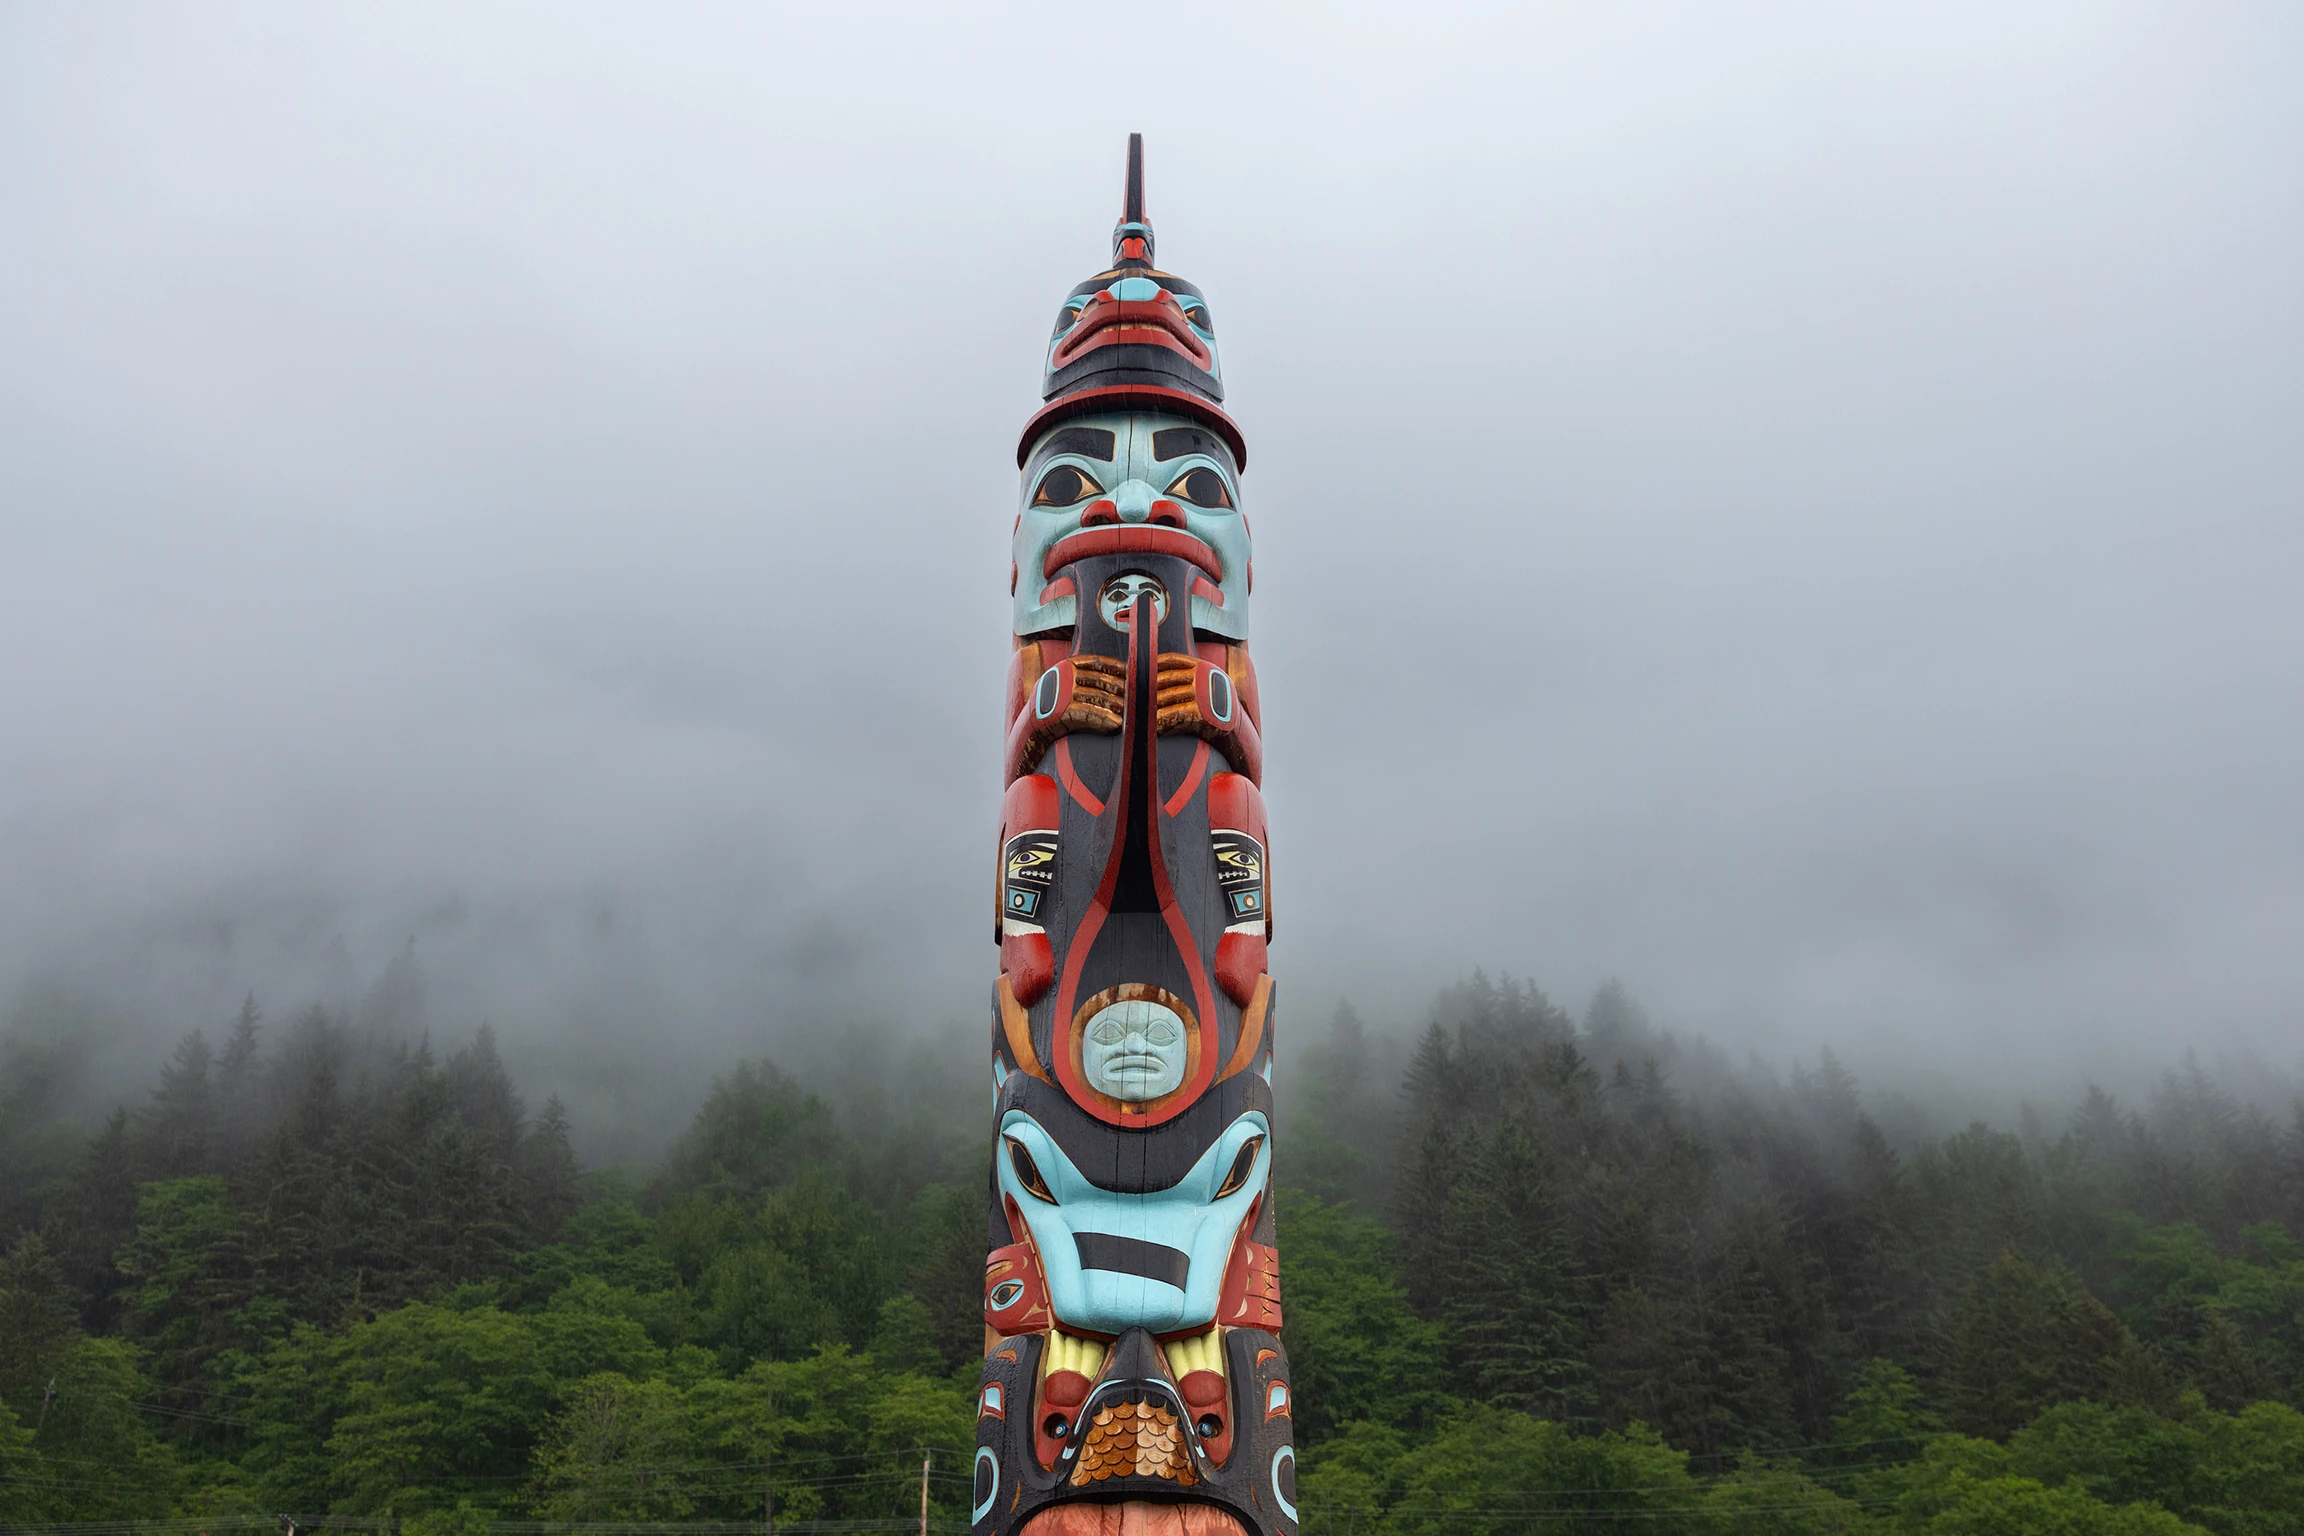 A multicolored painted totem pole set in front of a foggy forest landscape